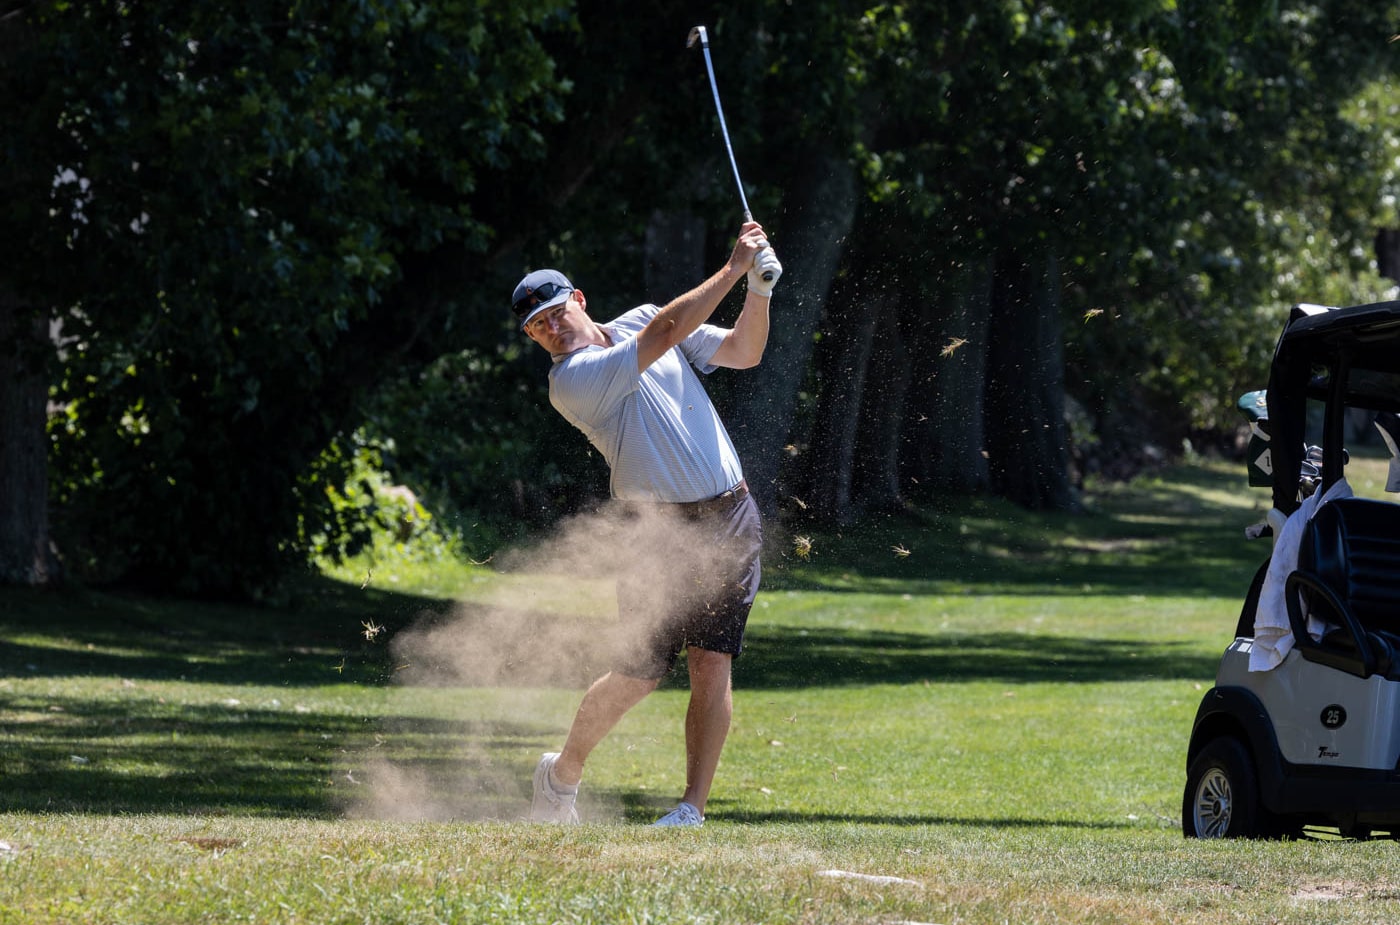 Country-Club-Of-New-Bedford FB-2023-Mens-FB-Gallery August-2023-Country-Club-Of-New-Bedford-FB-2023-Mens-FB-Gallery August-2023-Mens-FB-Gallery-Friday-Photos-Image-18